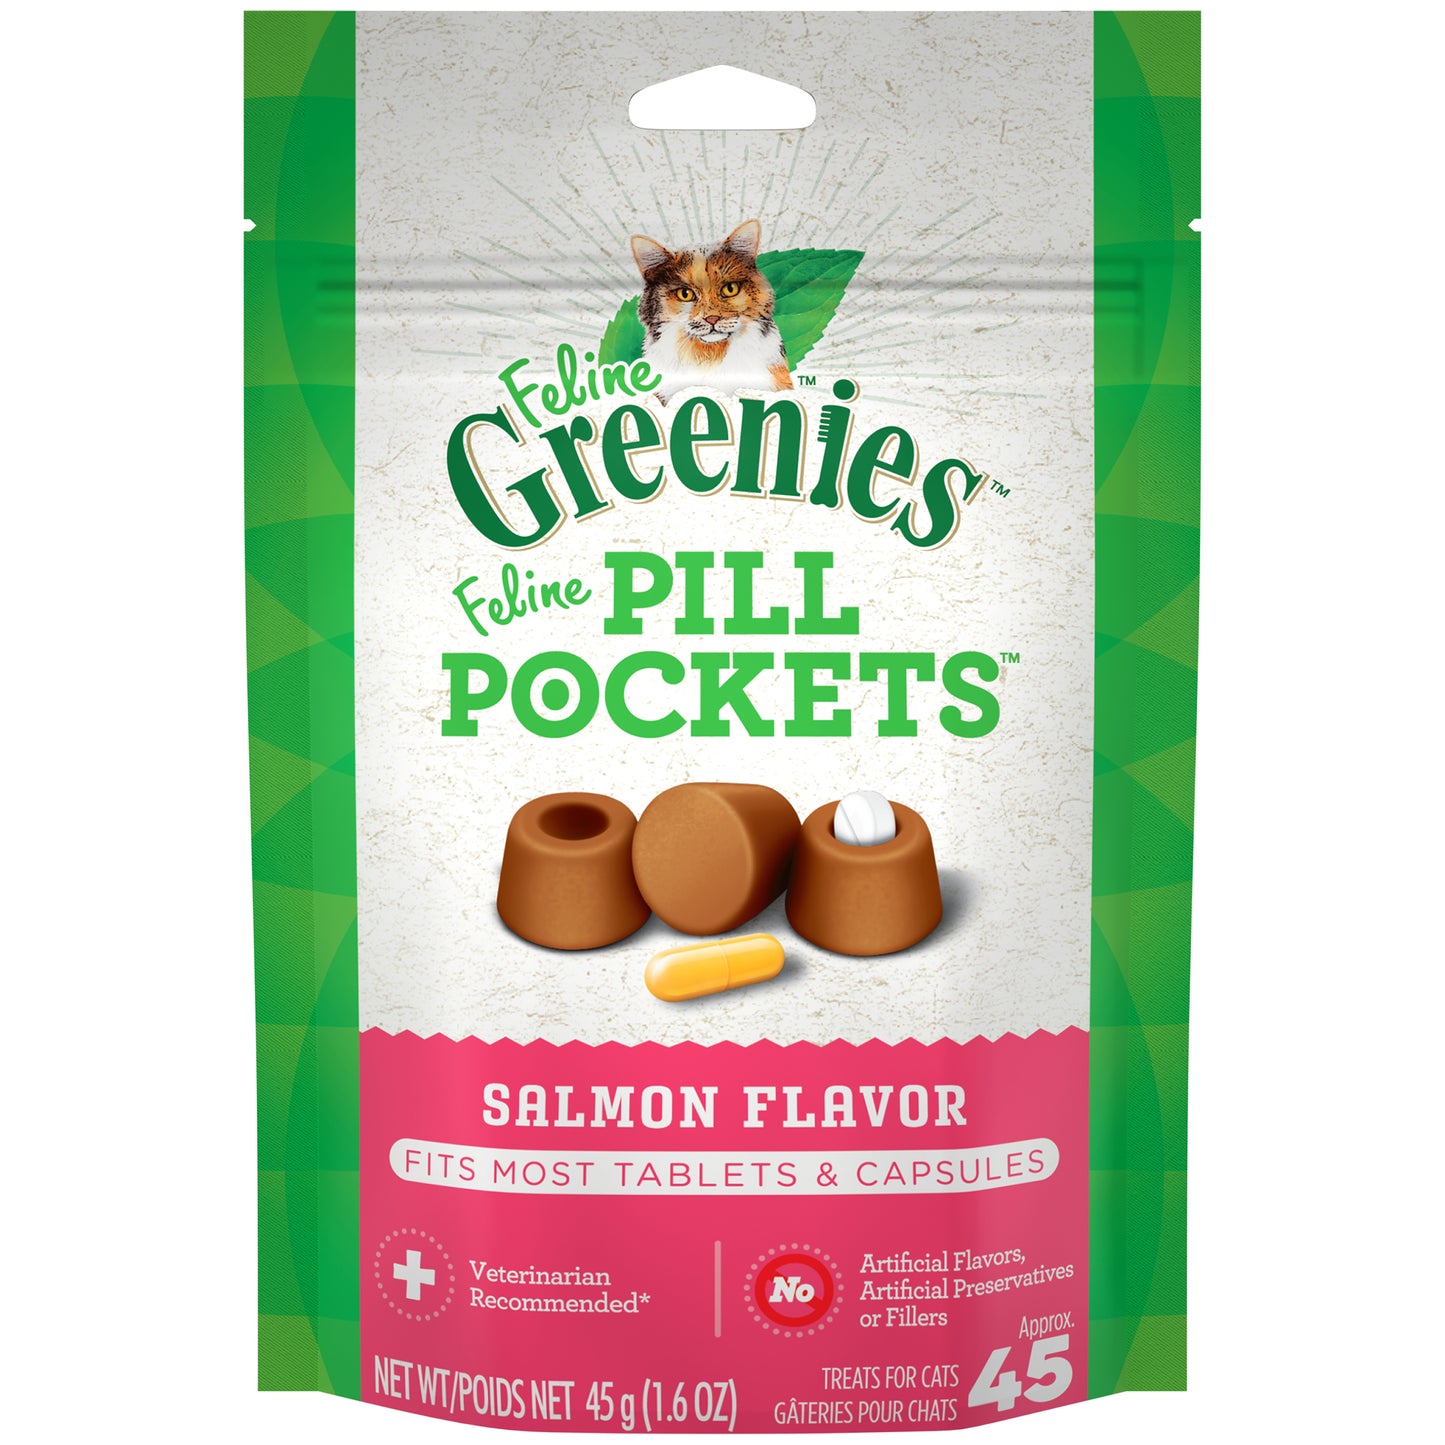 [Greenies][FELINE GREENIES Salmon Flavored Pill Pockets, 45 Count][Main Image (Front)]